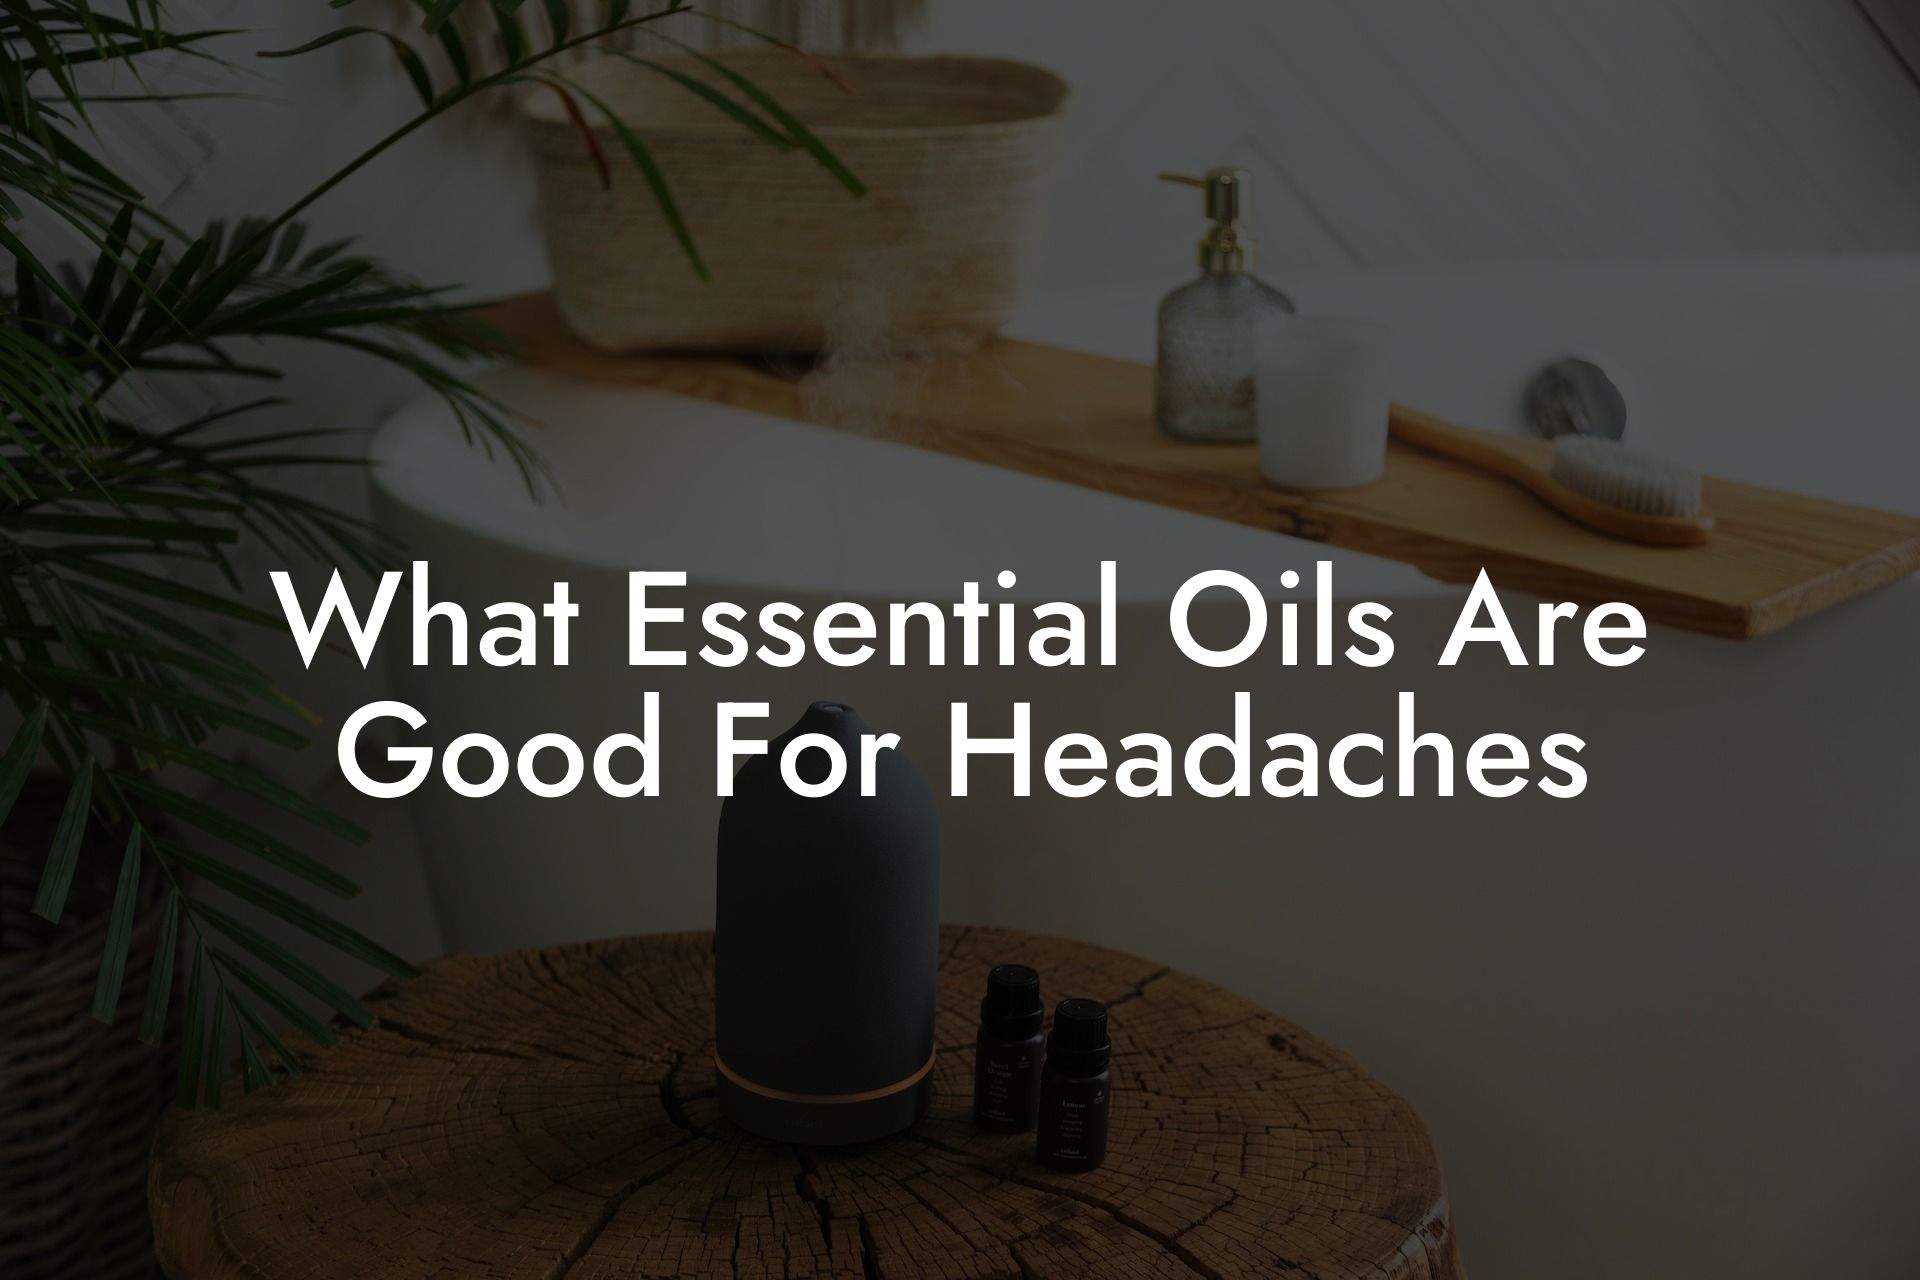 What Essential Oils Are Good For Headaches